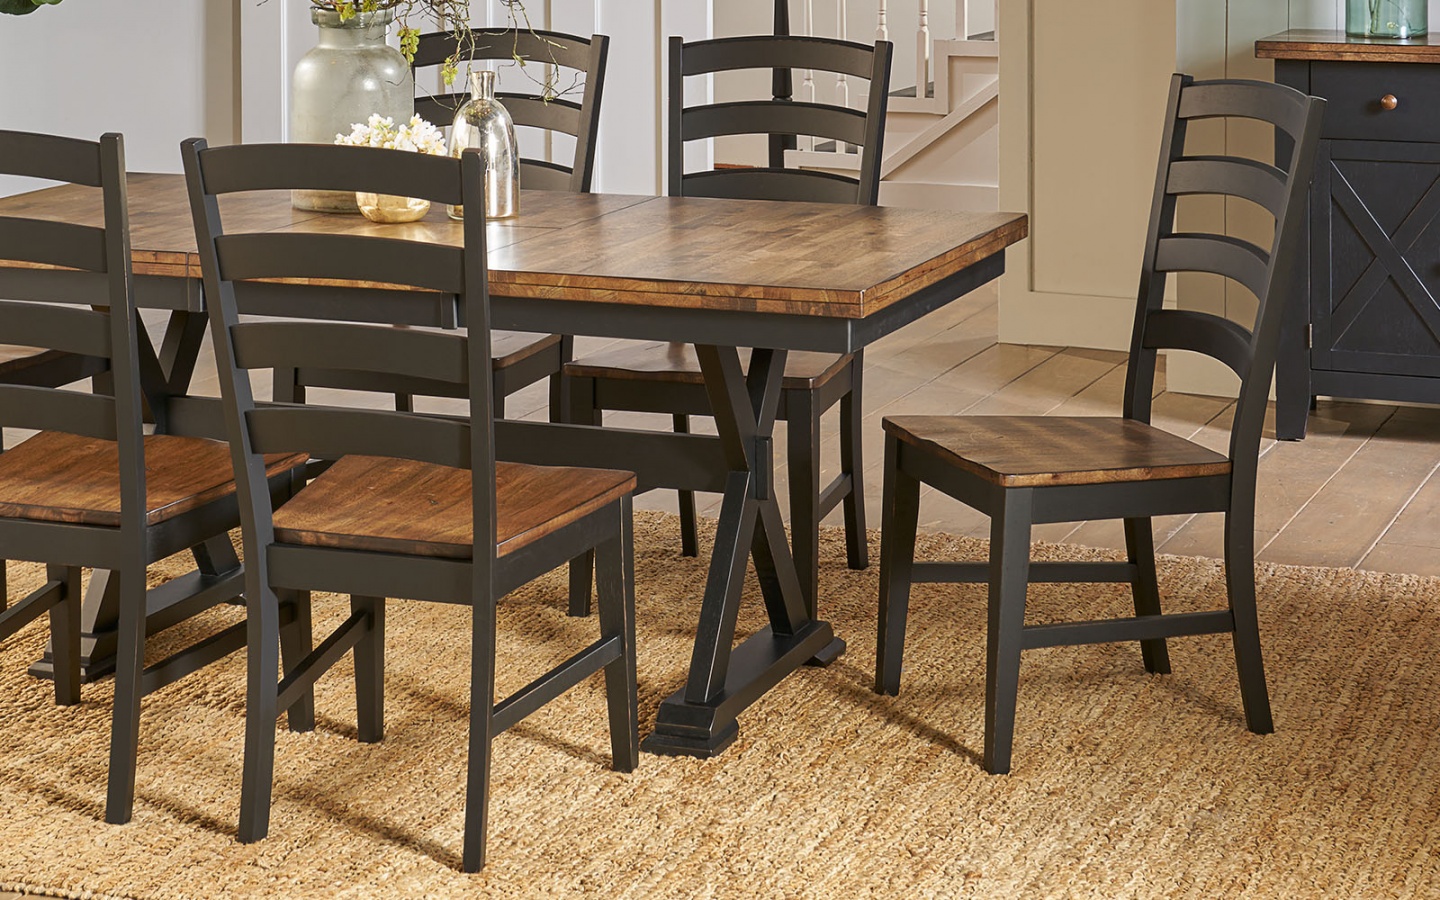 Stormy Ridge Table & Chairs